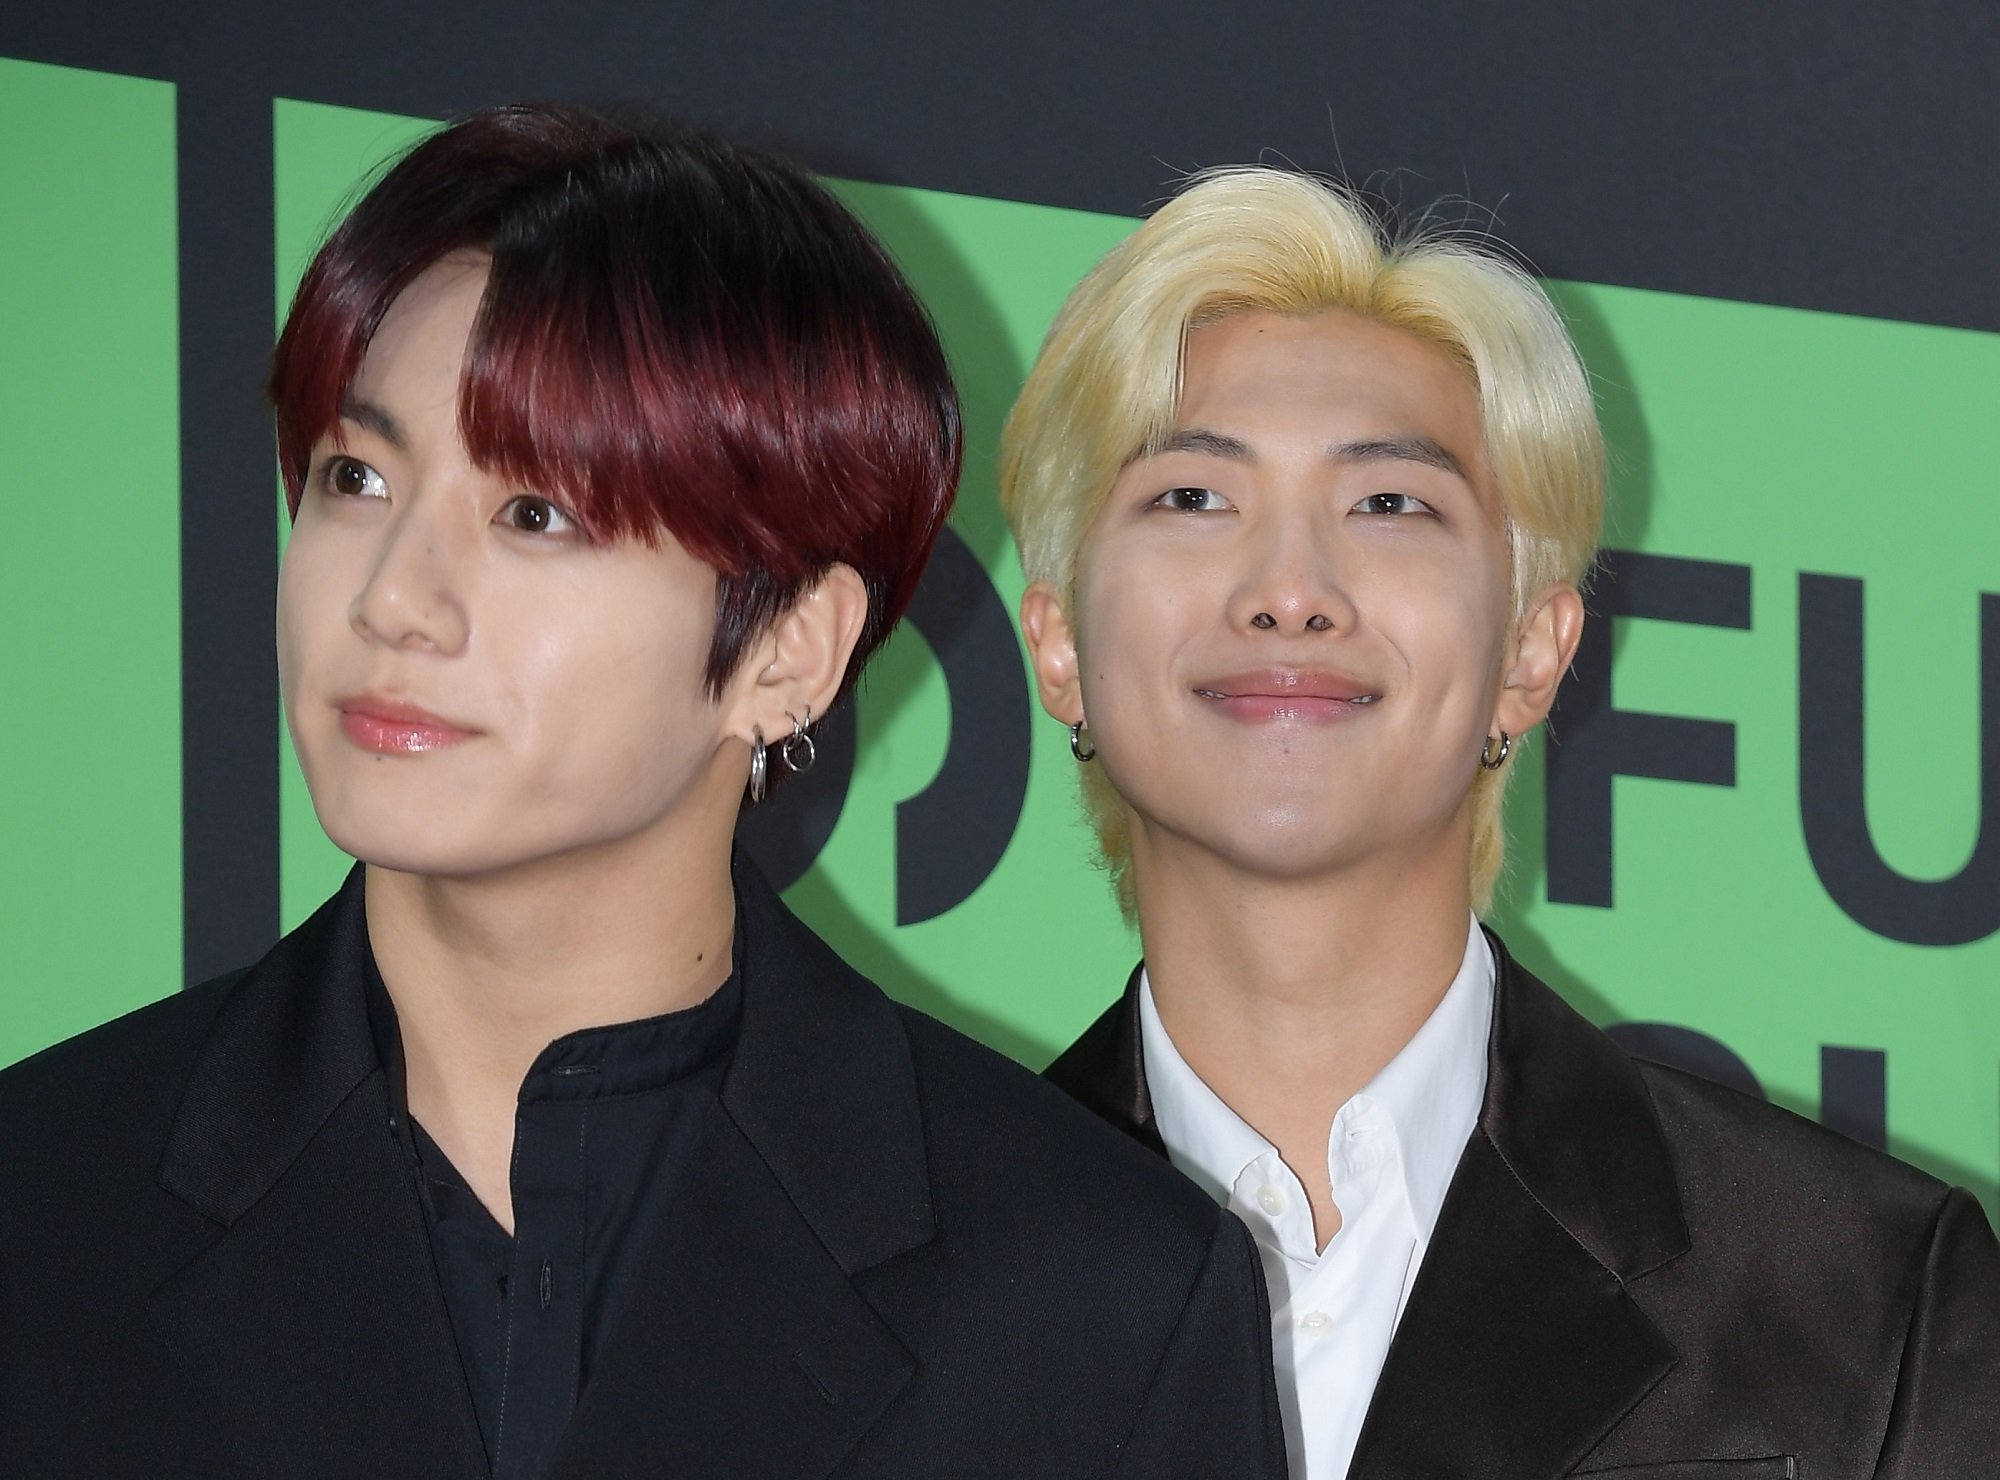 Jungkook and RM of BTS attend the Melon Music Awards in 2019